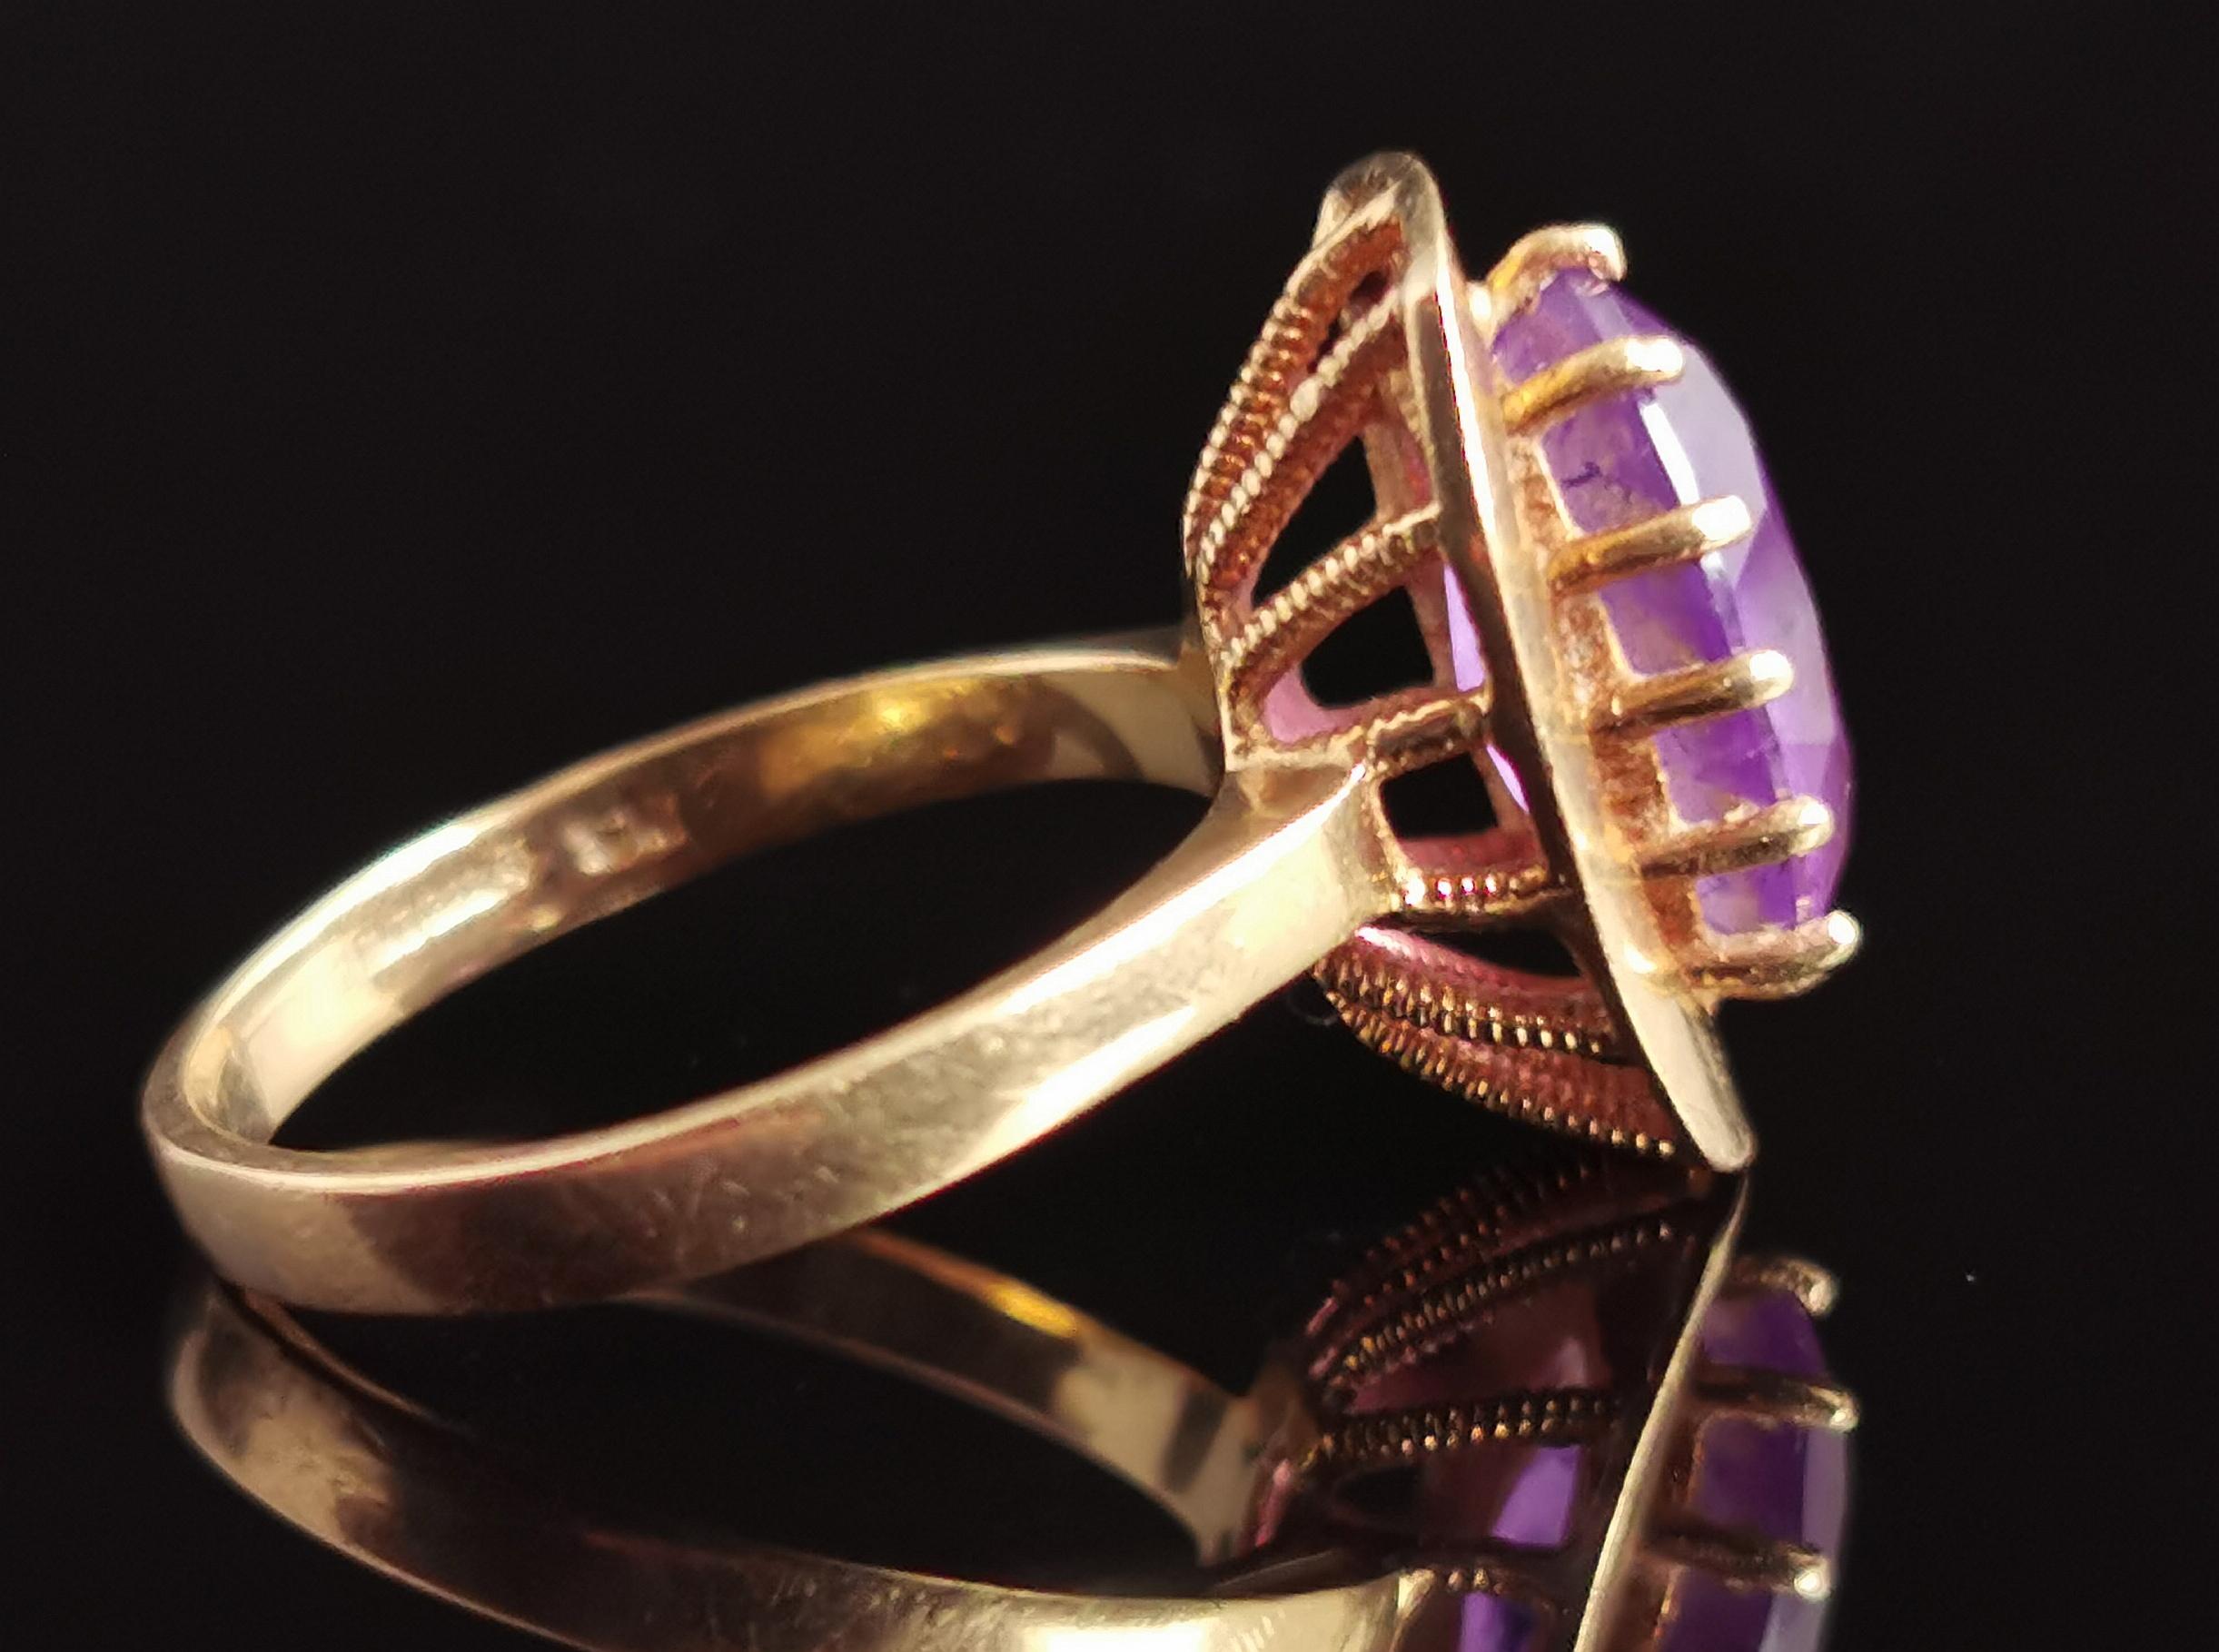 Women's Vintage Amethyst Cocktail Ring, 9k Yellow Gold, 1970s